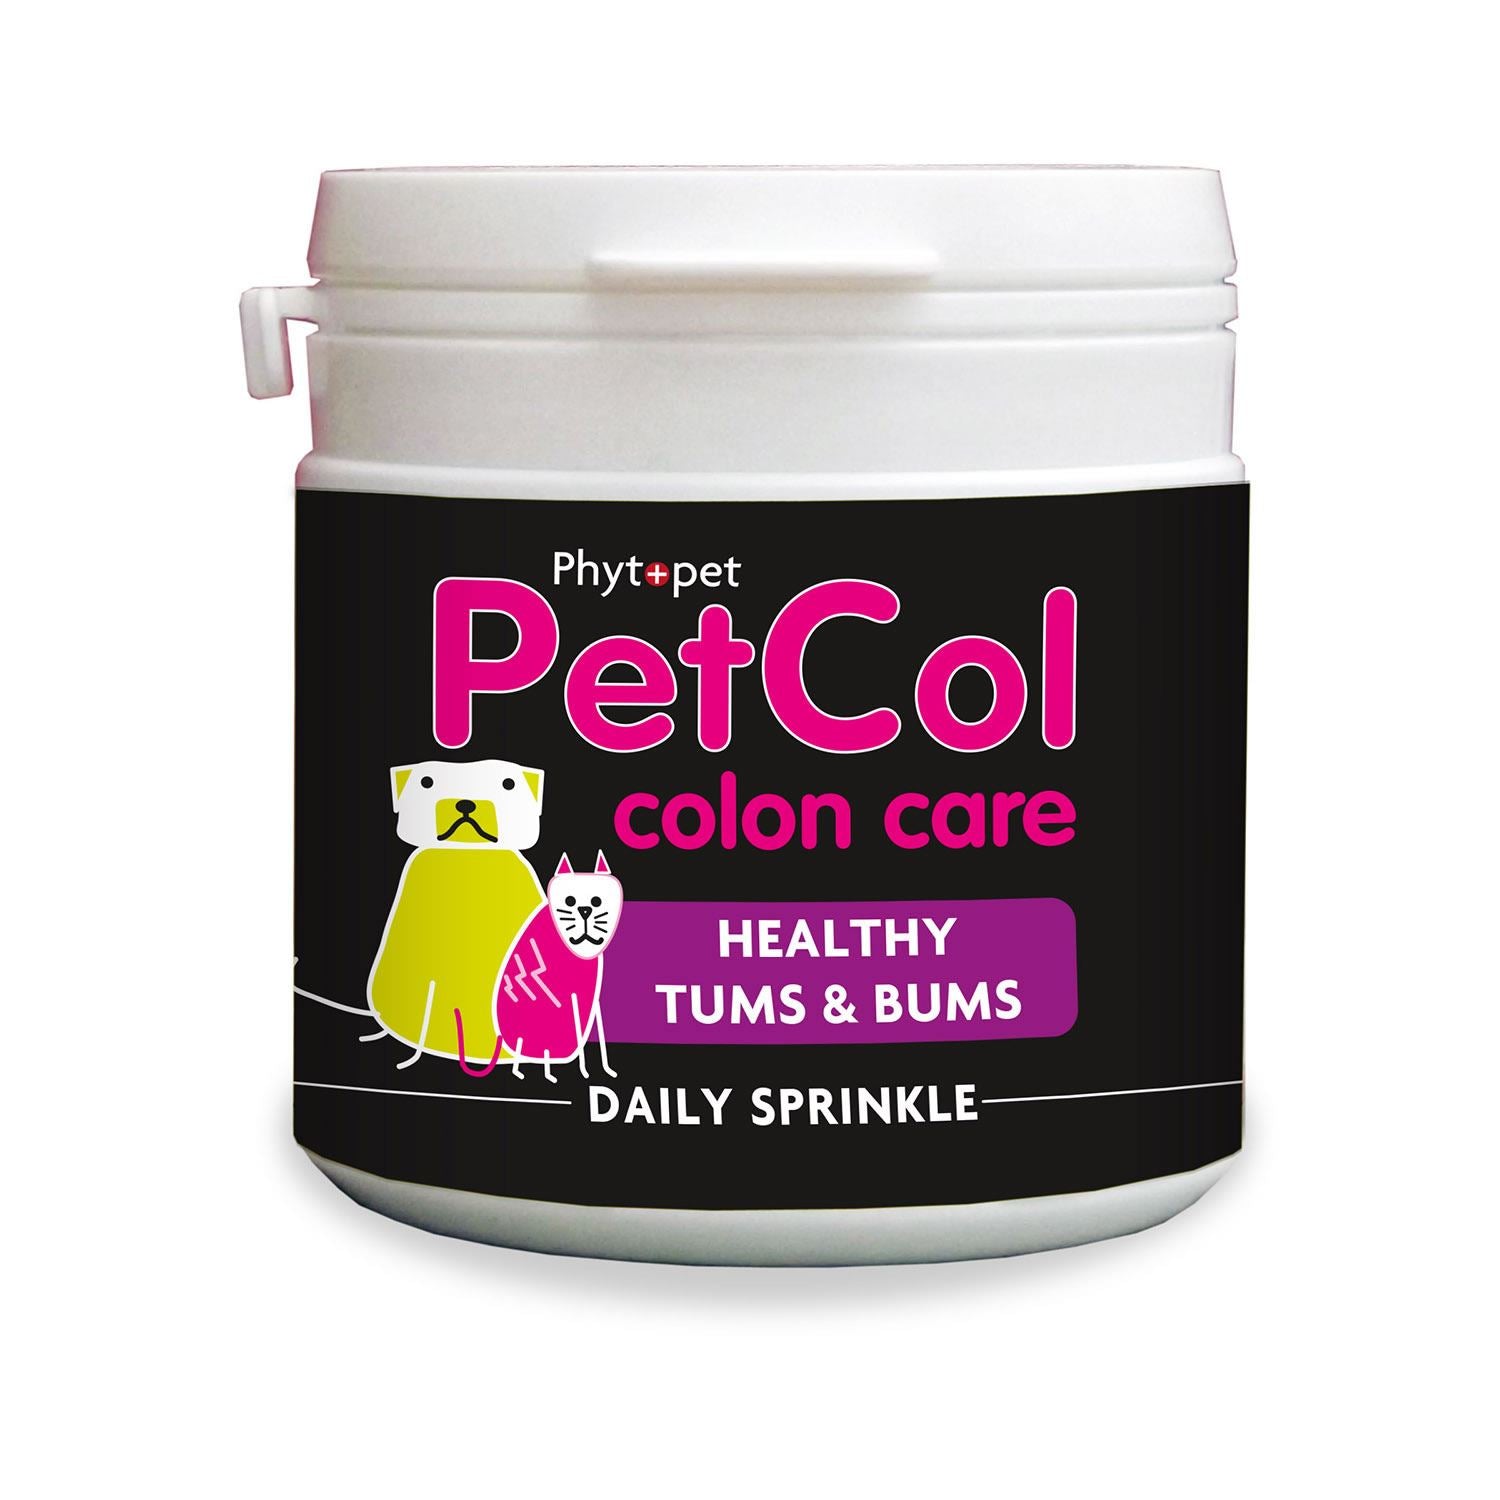 Phytopet Petcol - Just Horse Riders